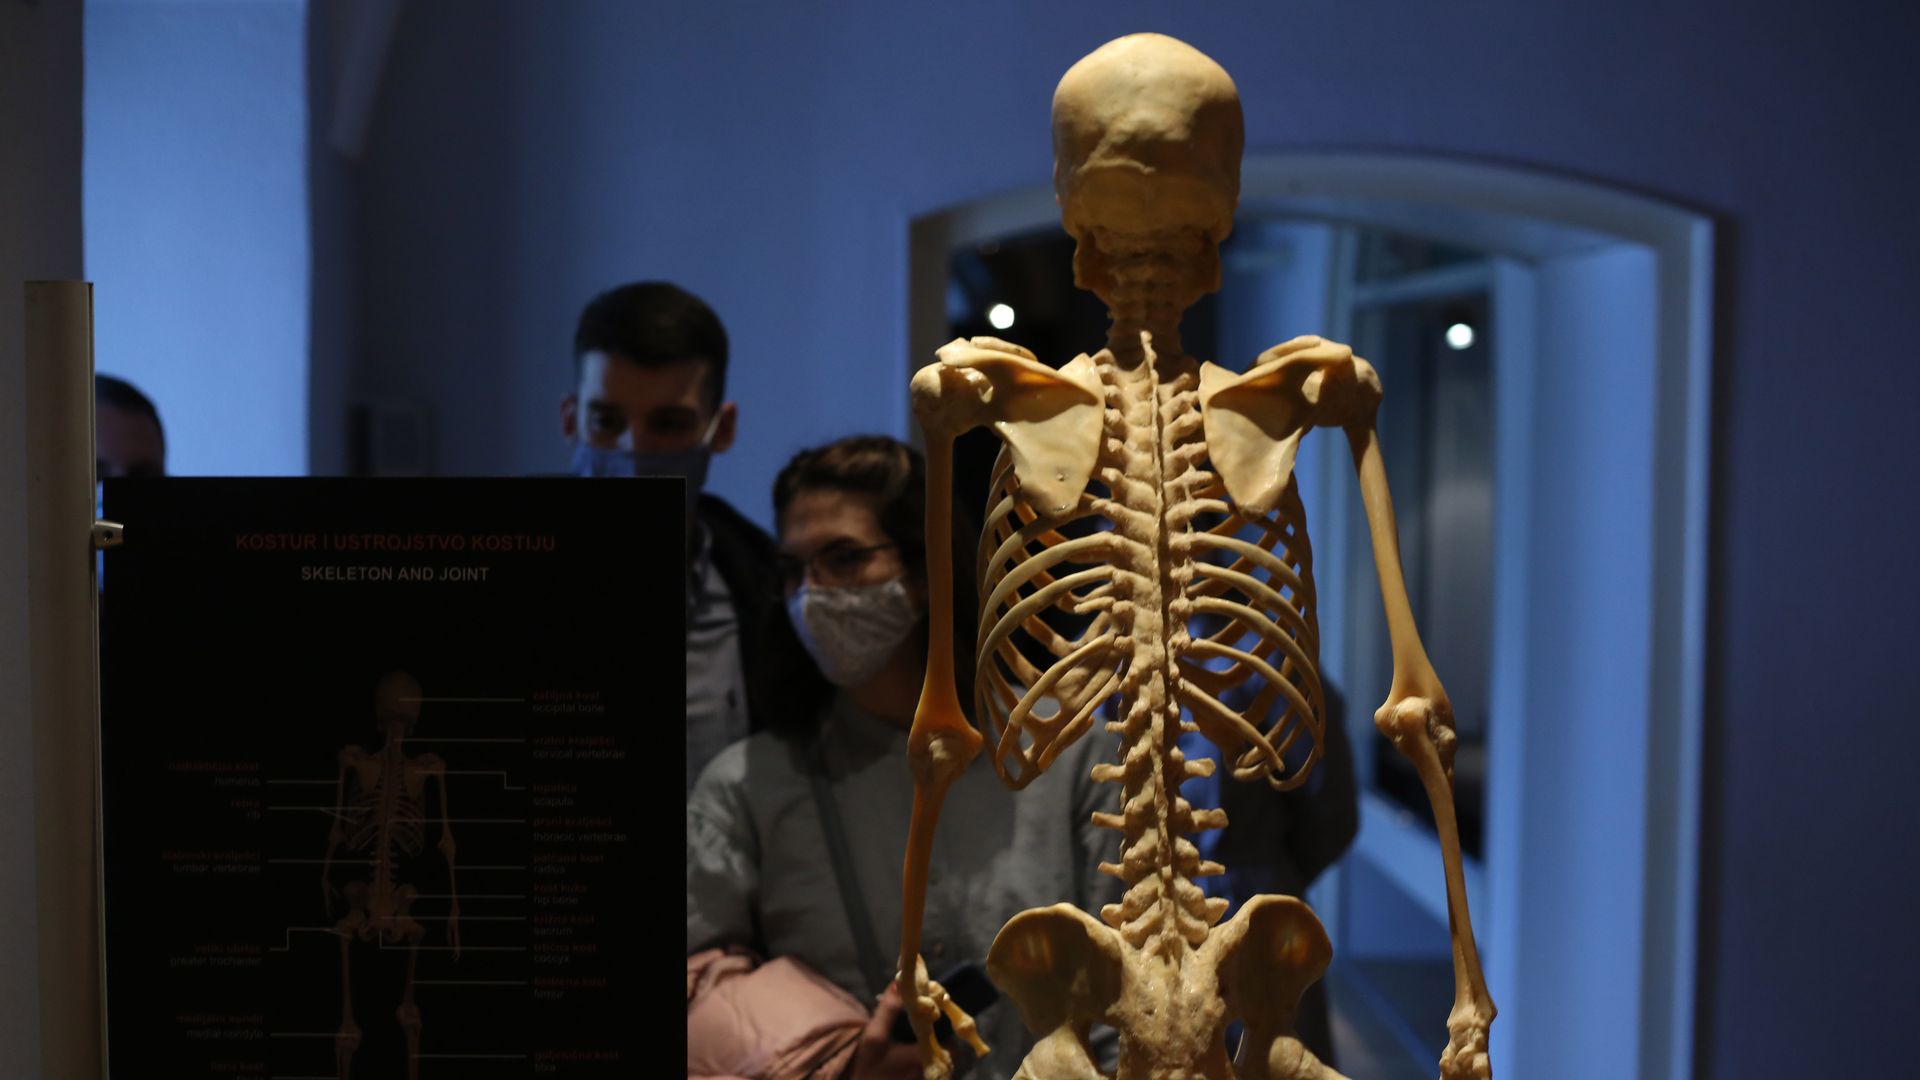 An artificial skeleton is being displayed during the "Human Body 2.0-enormous universe within us" exhibition at Klovicevi Dvori Gallery in Zagreb, Croatia on April 21, 2021.